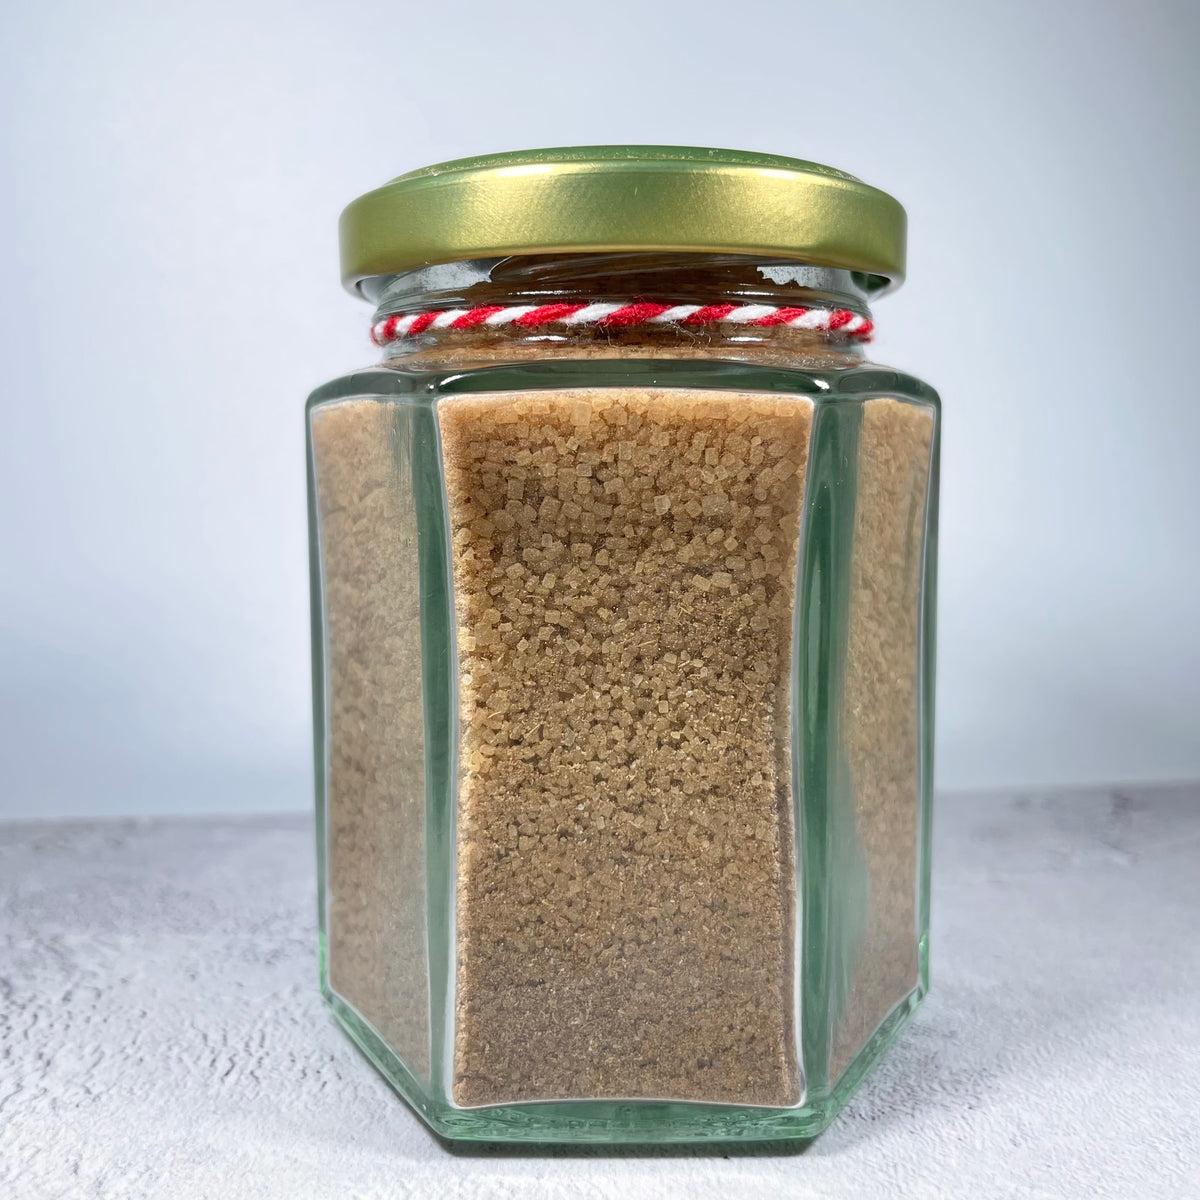 Side view of glass jar containing spiced sugar.